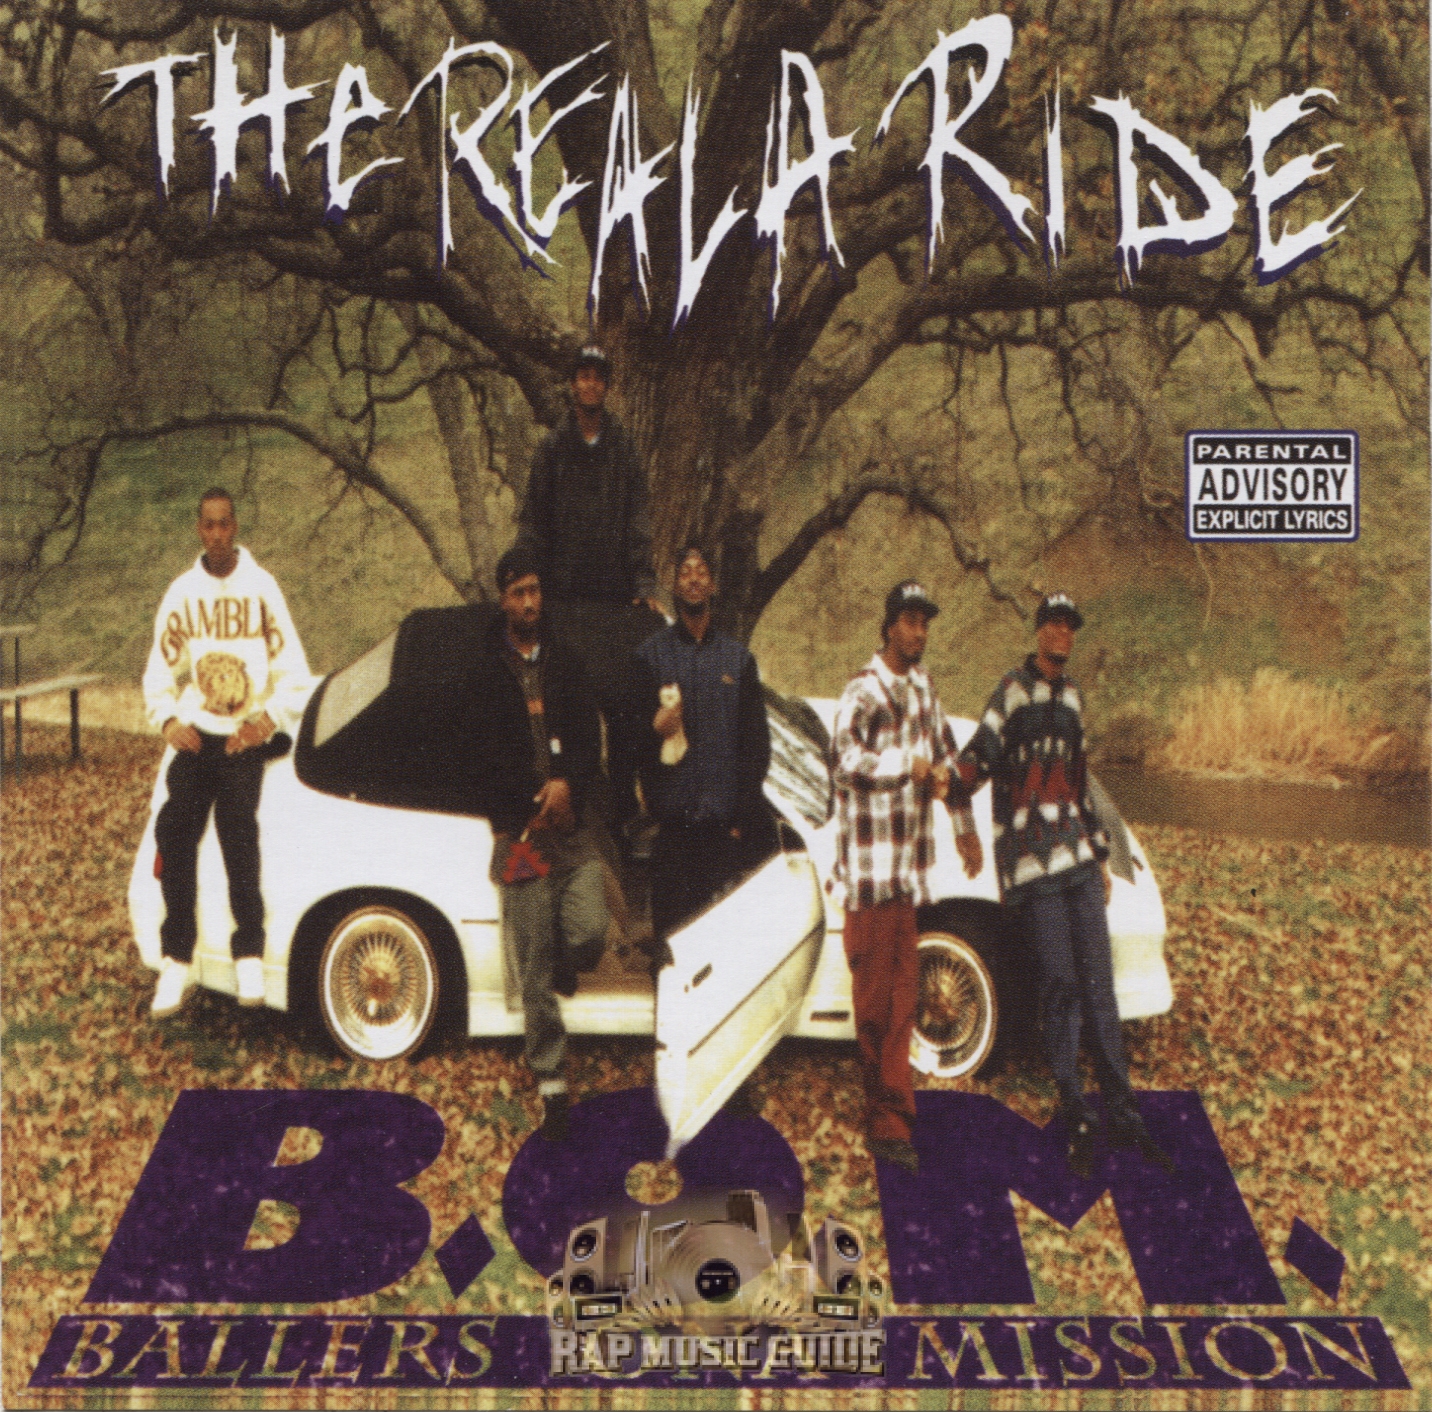 Ballers Ona Mission - The Reala Ride: Re-Release. CD | Rap Music Guide